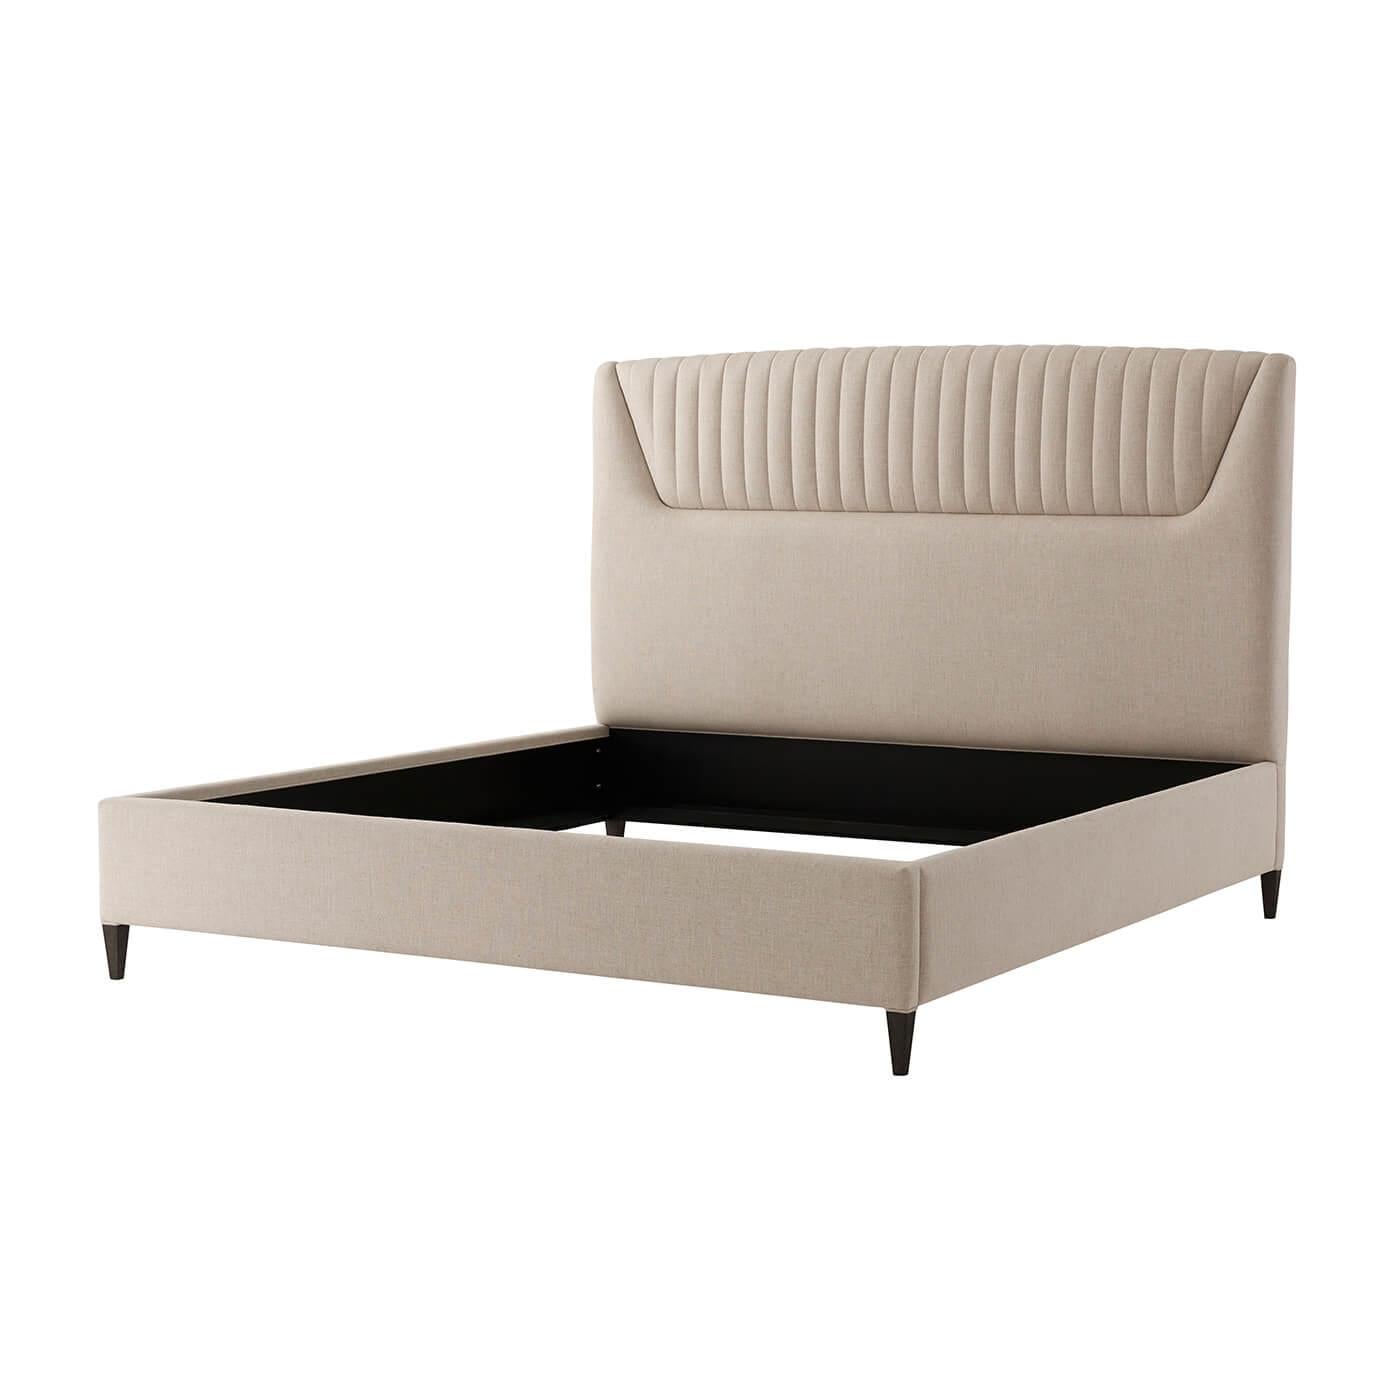 A modern Art Deco style king size bed with an upholstered headboard having a comb channeled centered panel, upholstered side rails and raised on square tapered legs.

Dimensions: 81.75